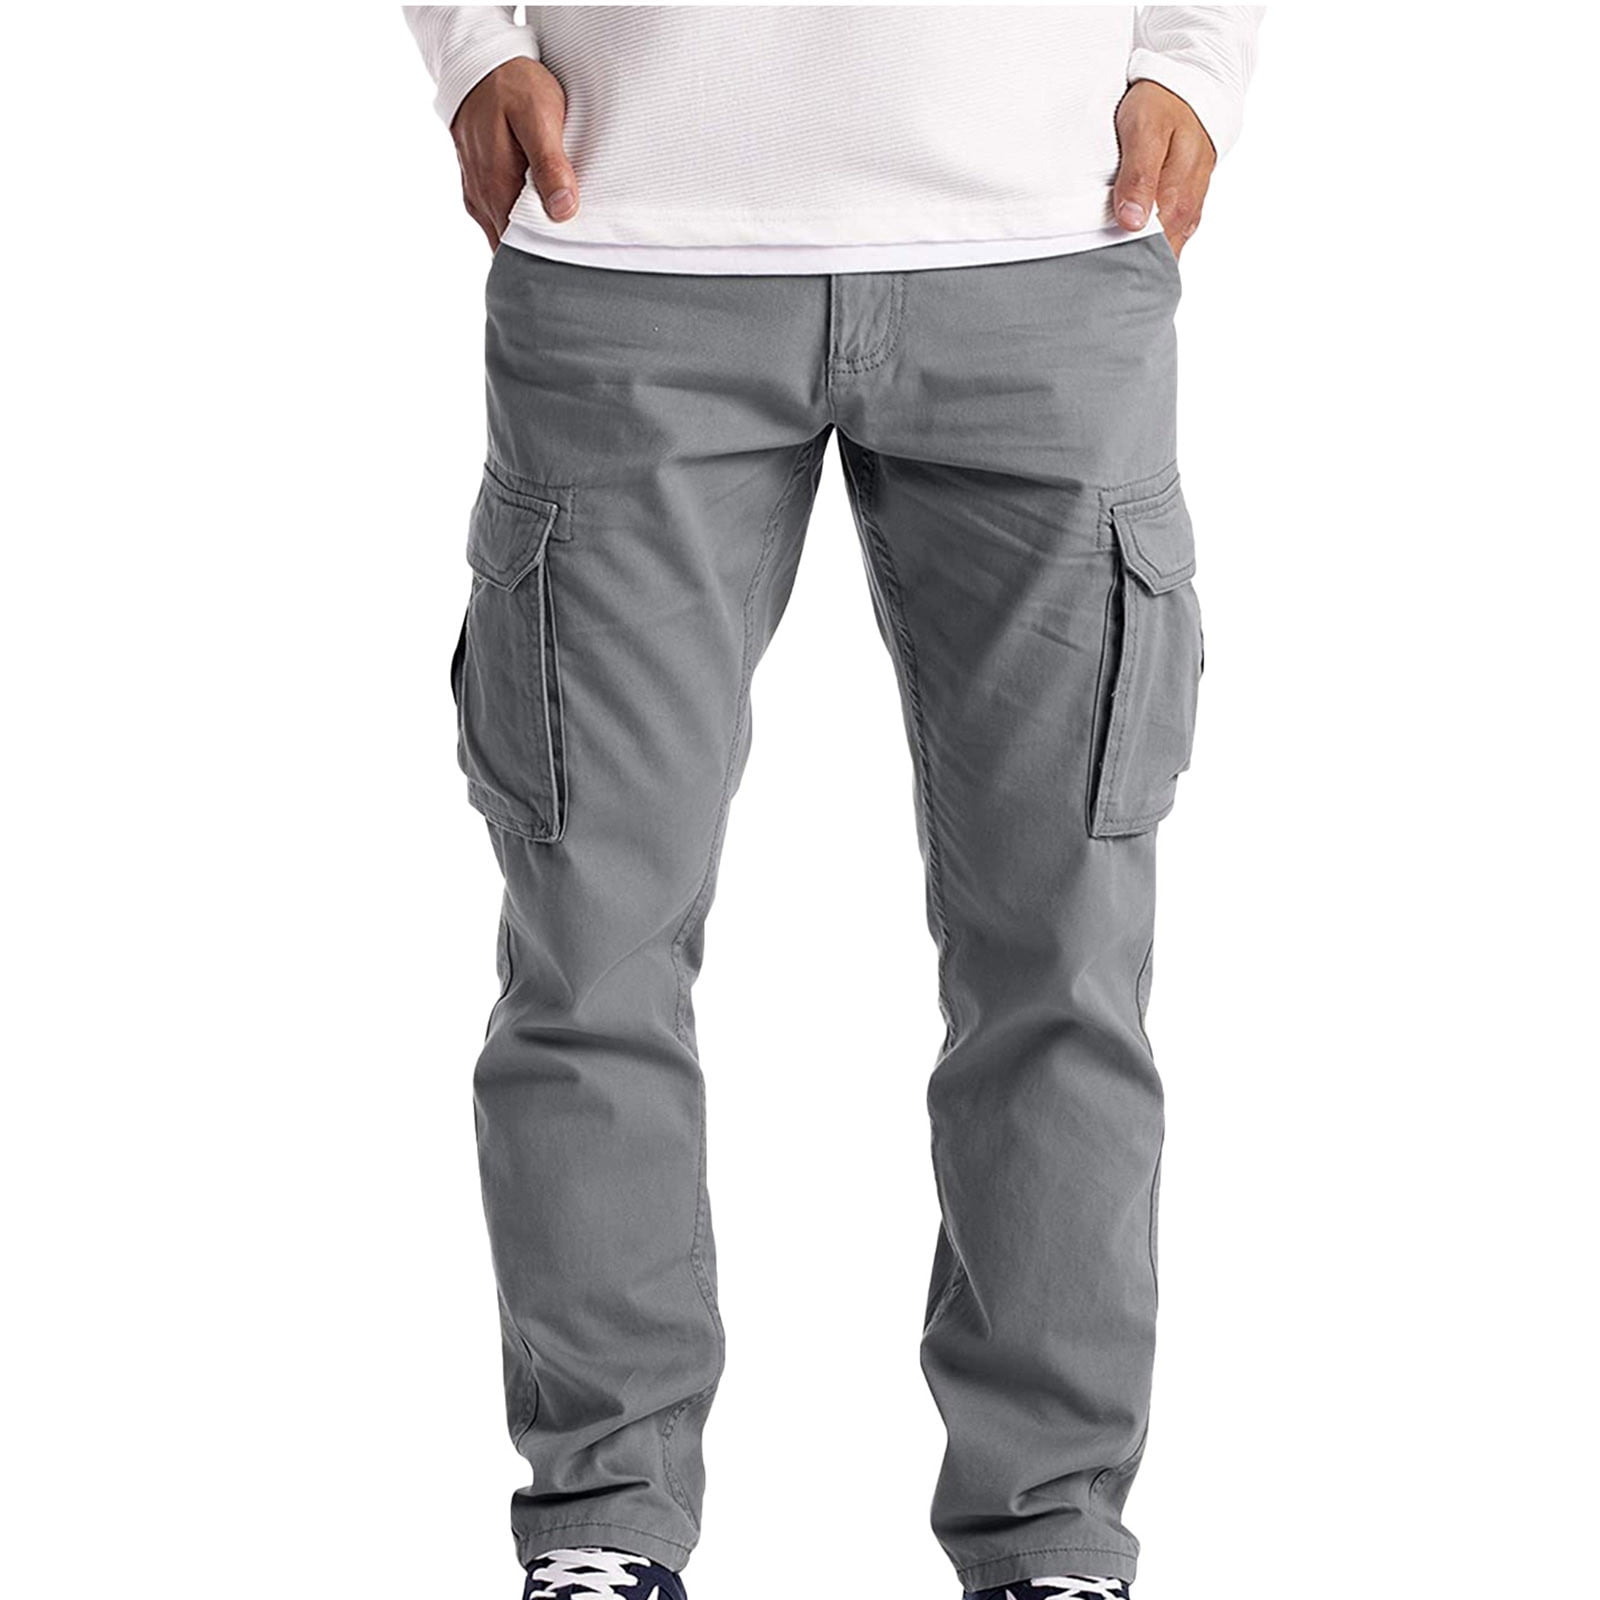 High Quality Hard Wearing Active Work Trousers Mens Pants Combat Pocket Security 